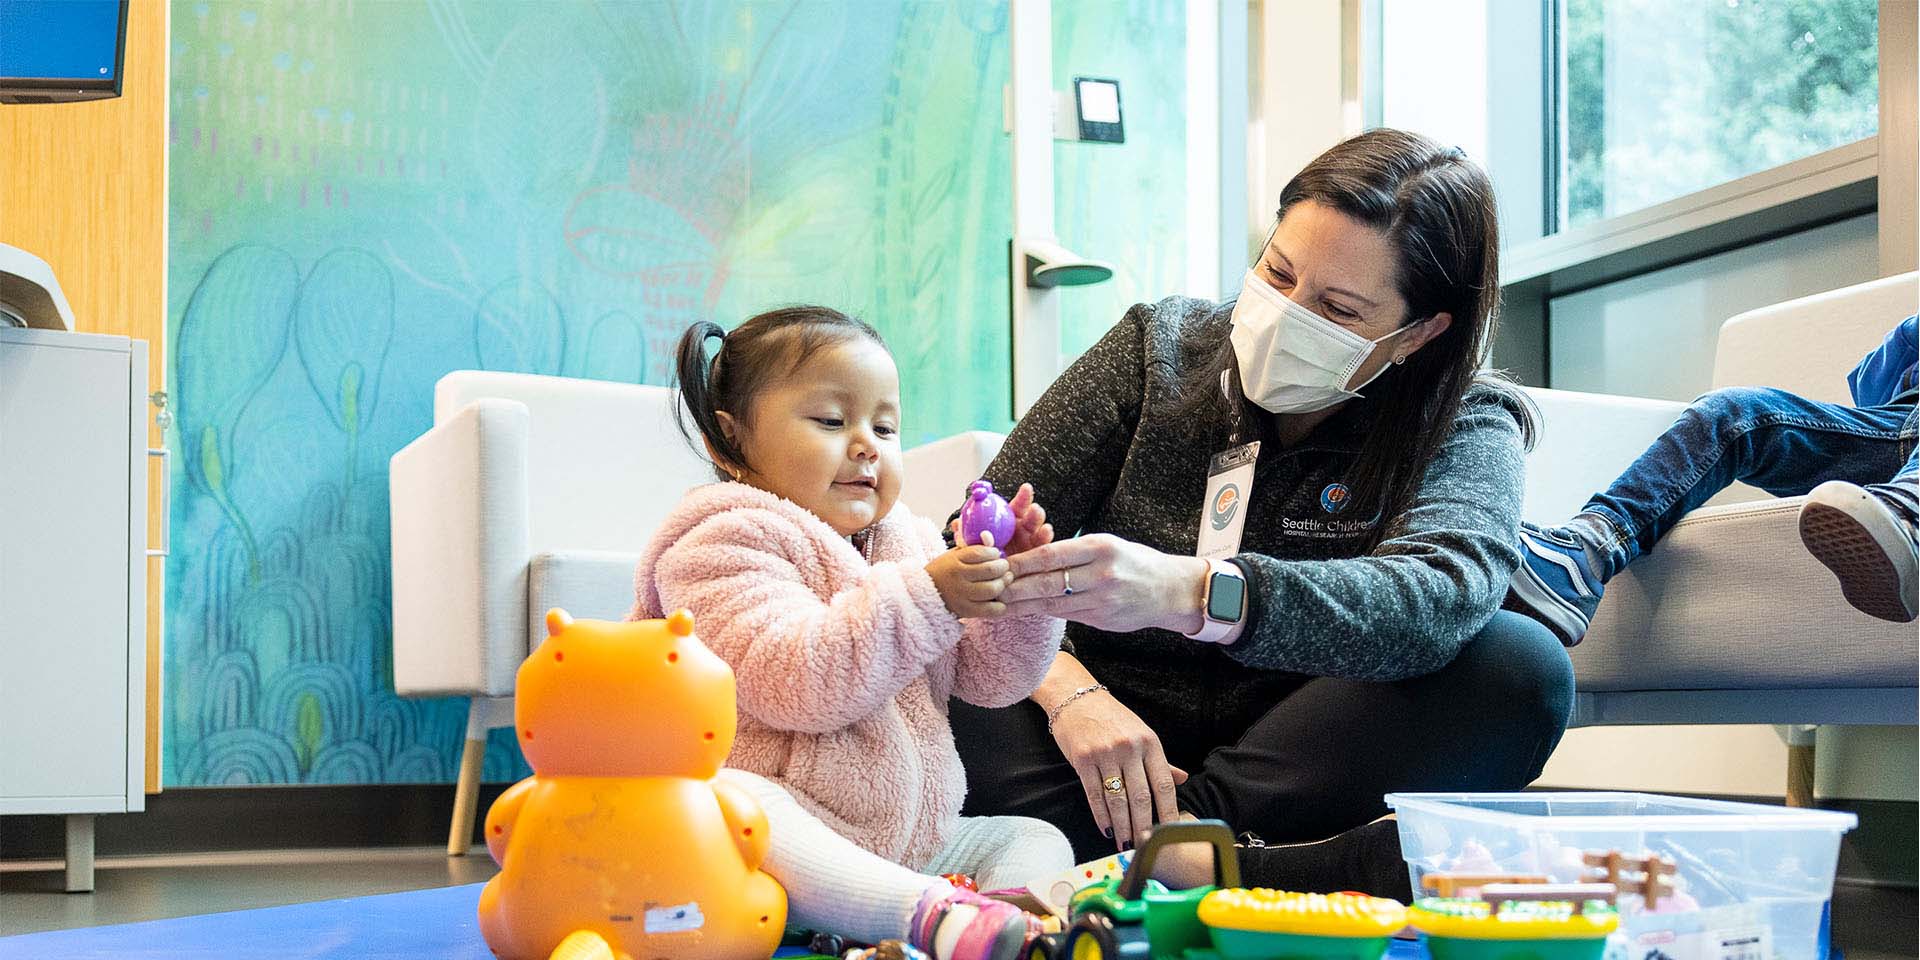 A young girl plays with a Seattle Children's provider